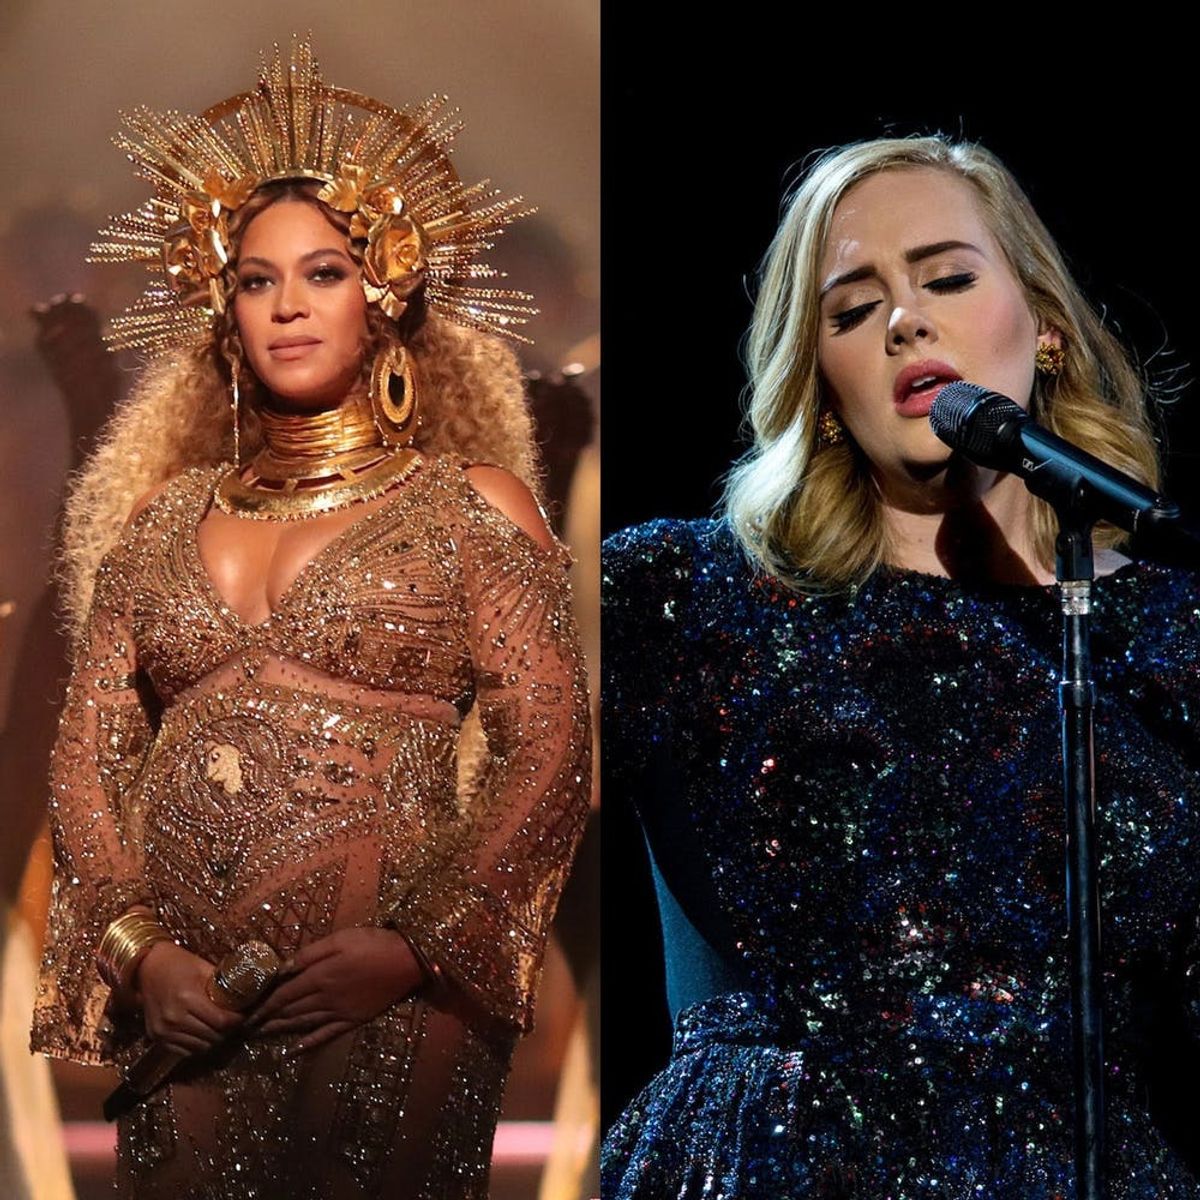 Beyoncé, Adele, and Taylor Swift Top Forbes’ List of Highest-Paid Women in Music for 2017